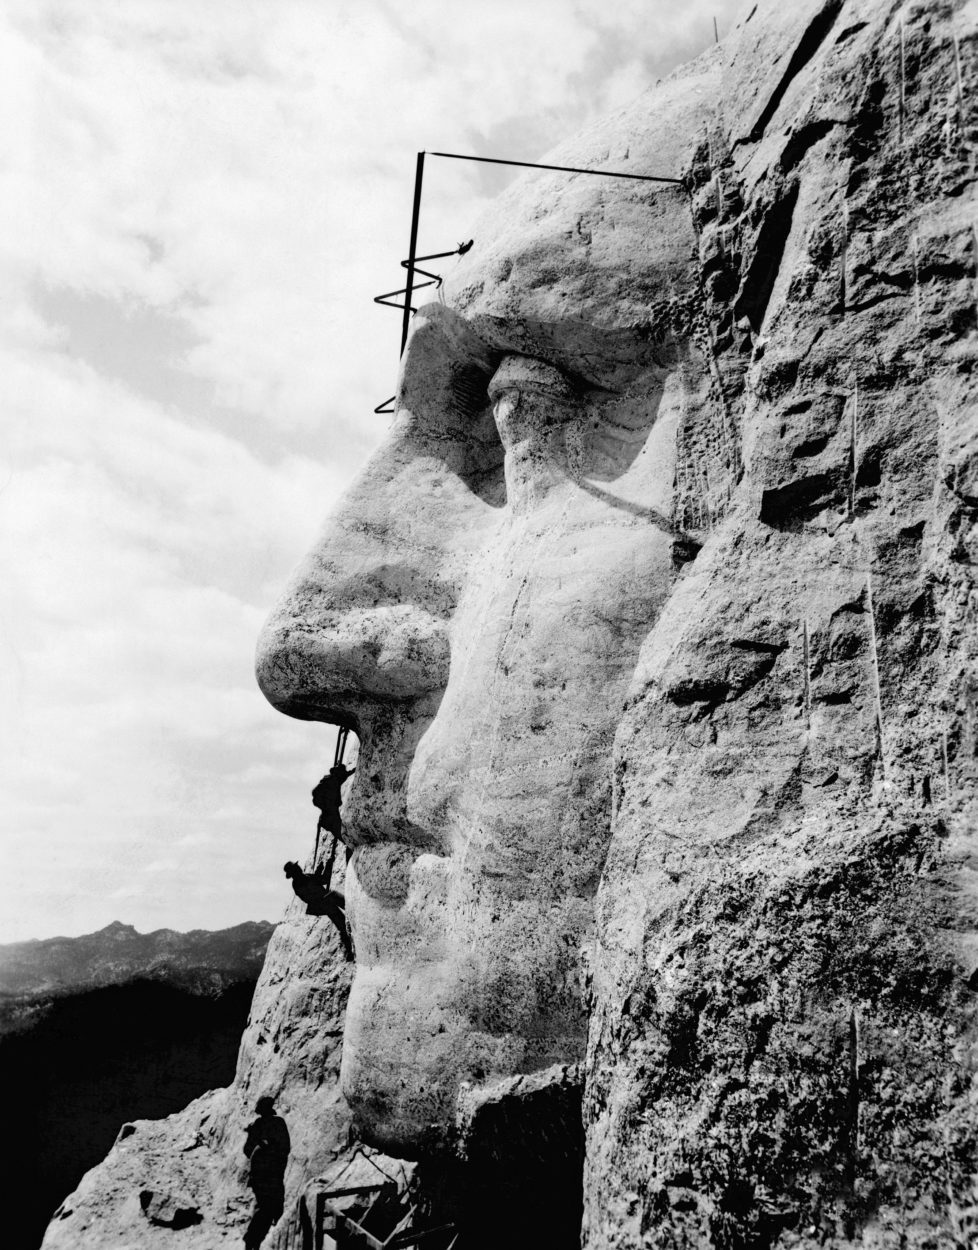 Workmen working on the face of George Washington, Rushmore, South Dakota, circa 1932. (Photo by Underwood Archives/Getty Images)